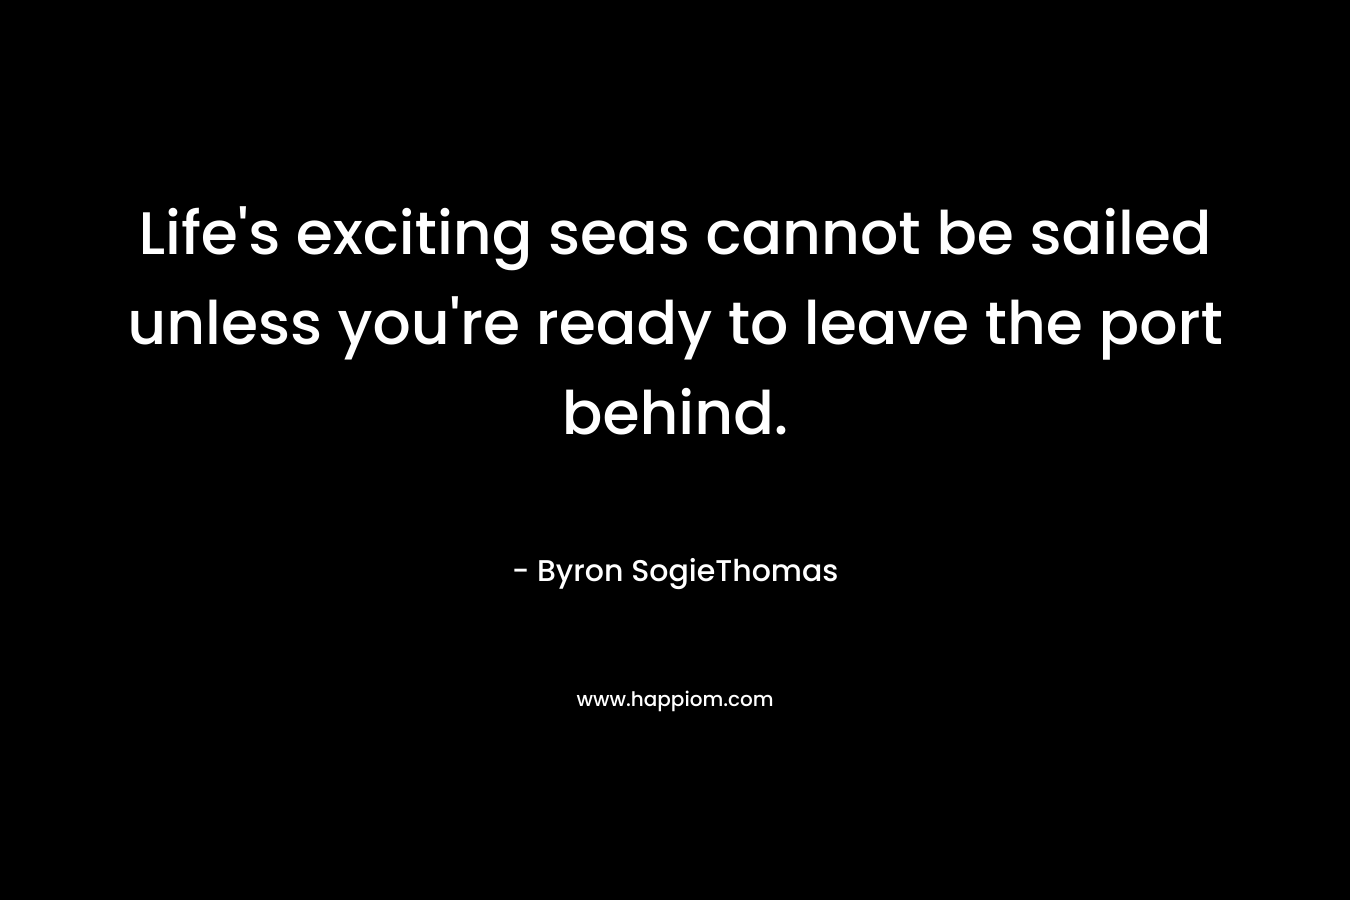 Life's exciting seas cannot be sailed unless you're ready to leave the port behind.